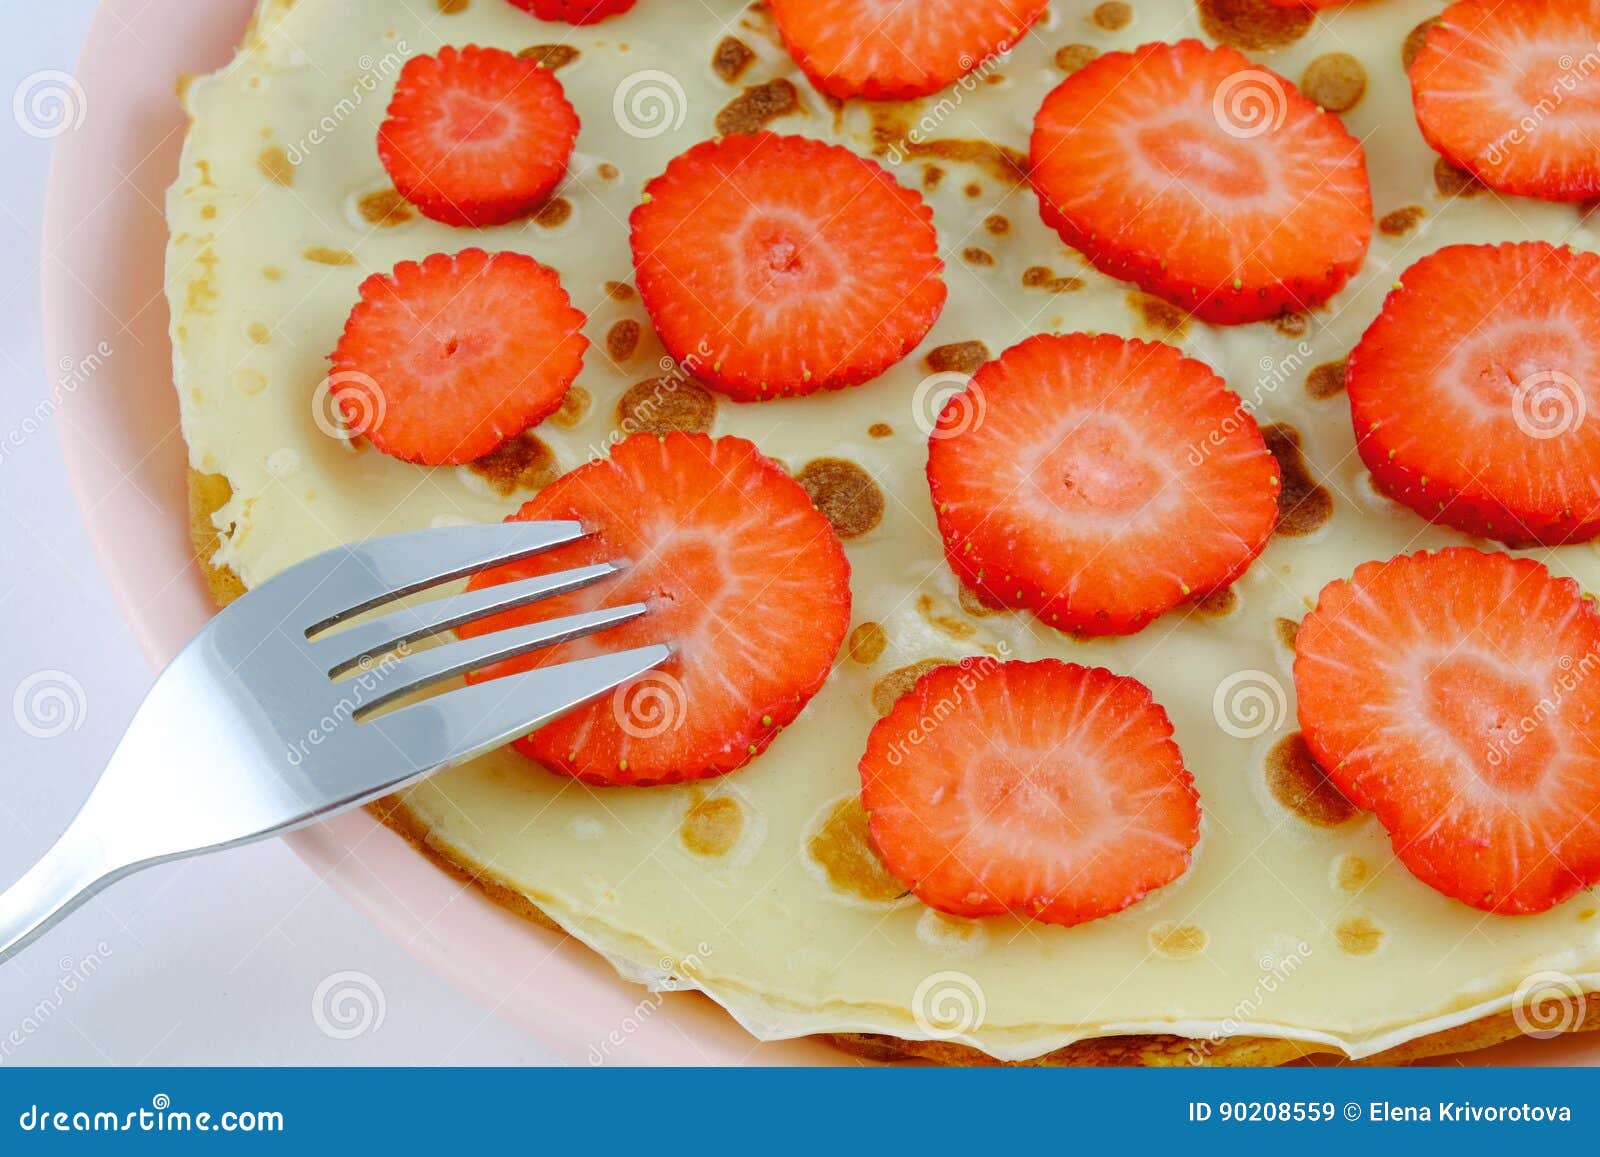 Pancakes with Slices of Strawberries. Stock Image - Image of homemade ...